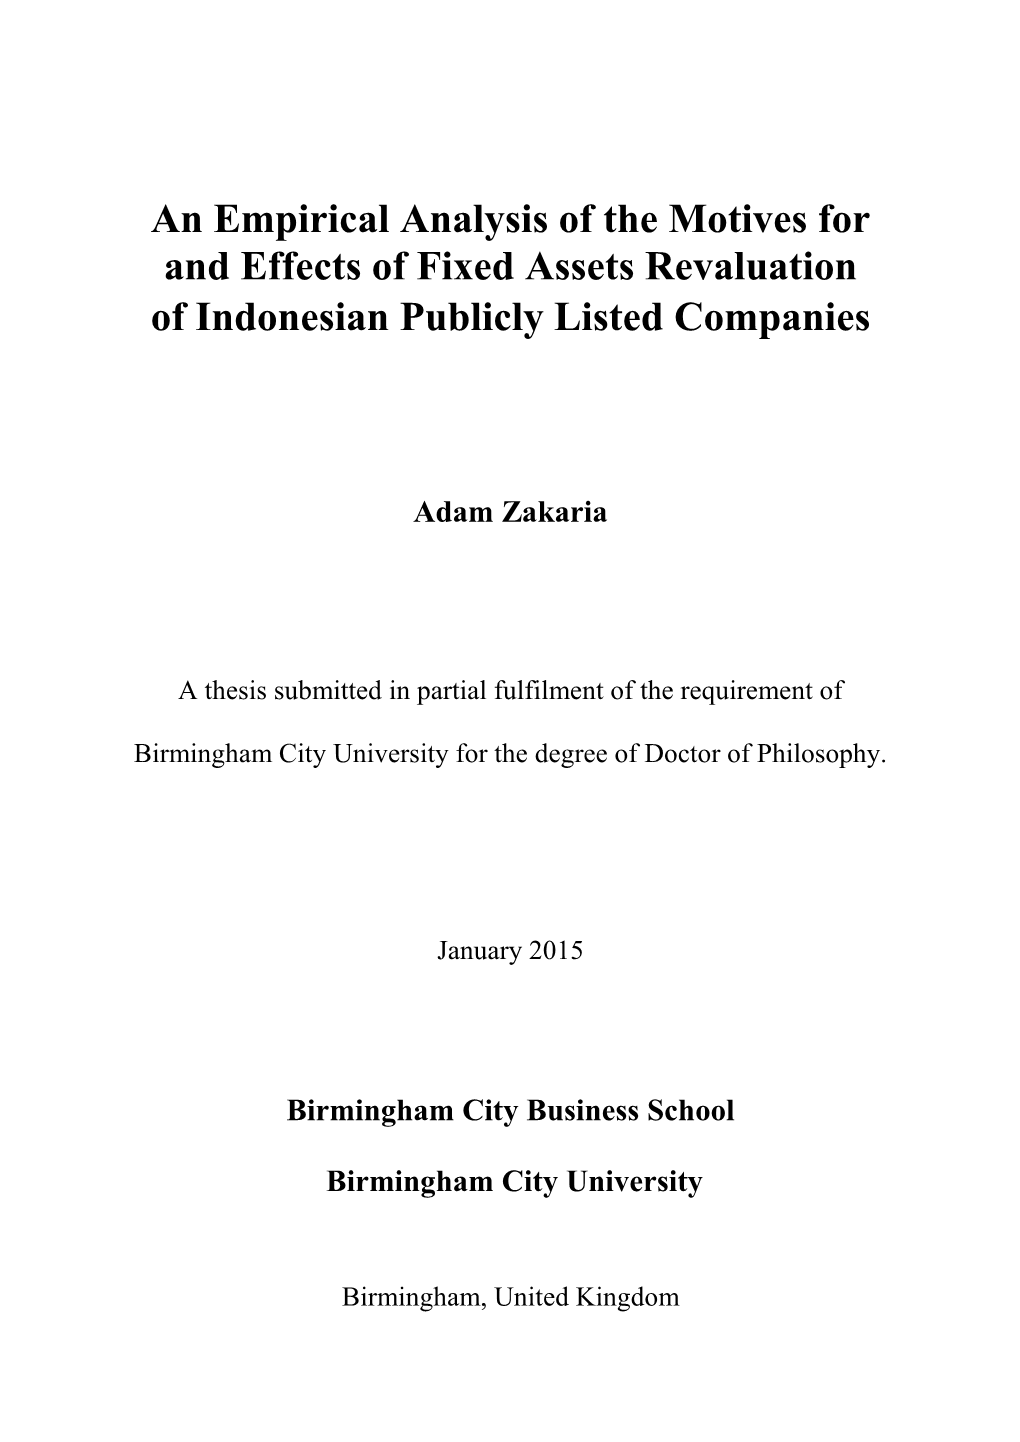 An Empirical Analysis of the Motives for and Effects of Fixed Assets Revaluation of Indonesian Publicly Listed Companies